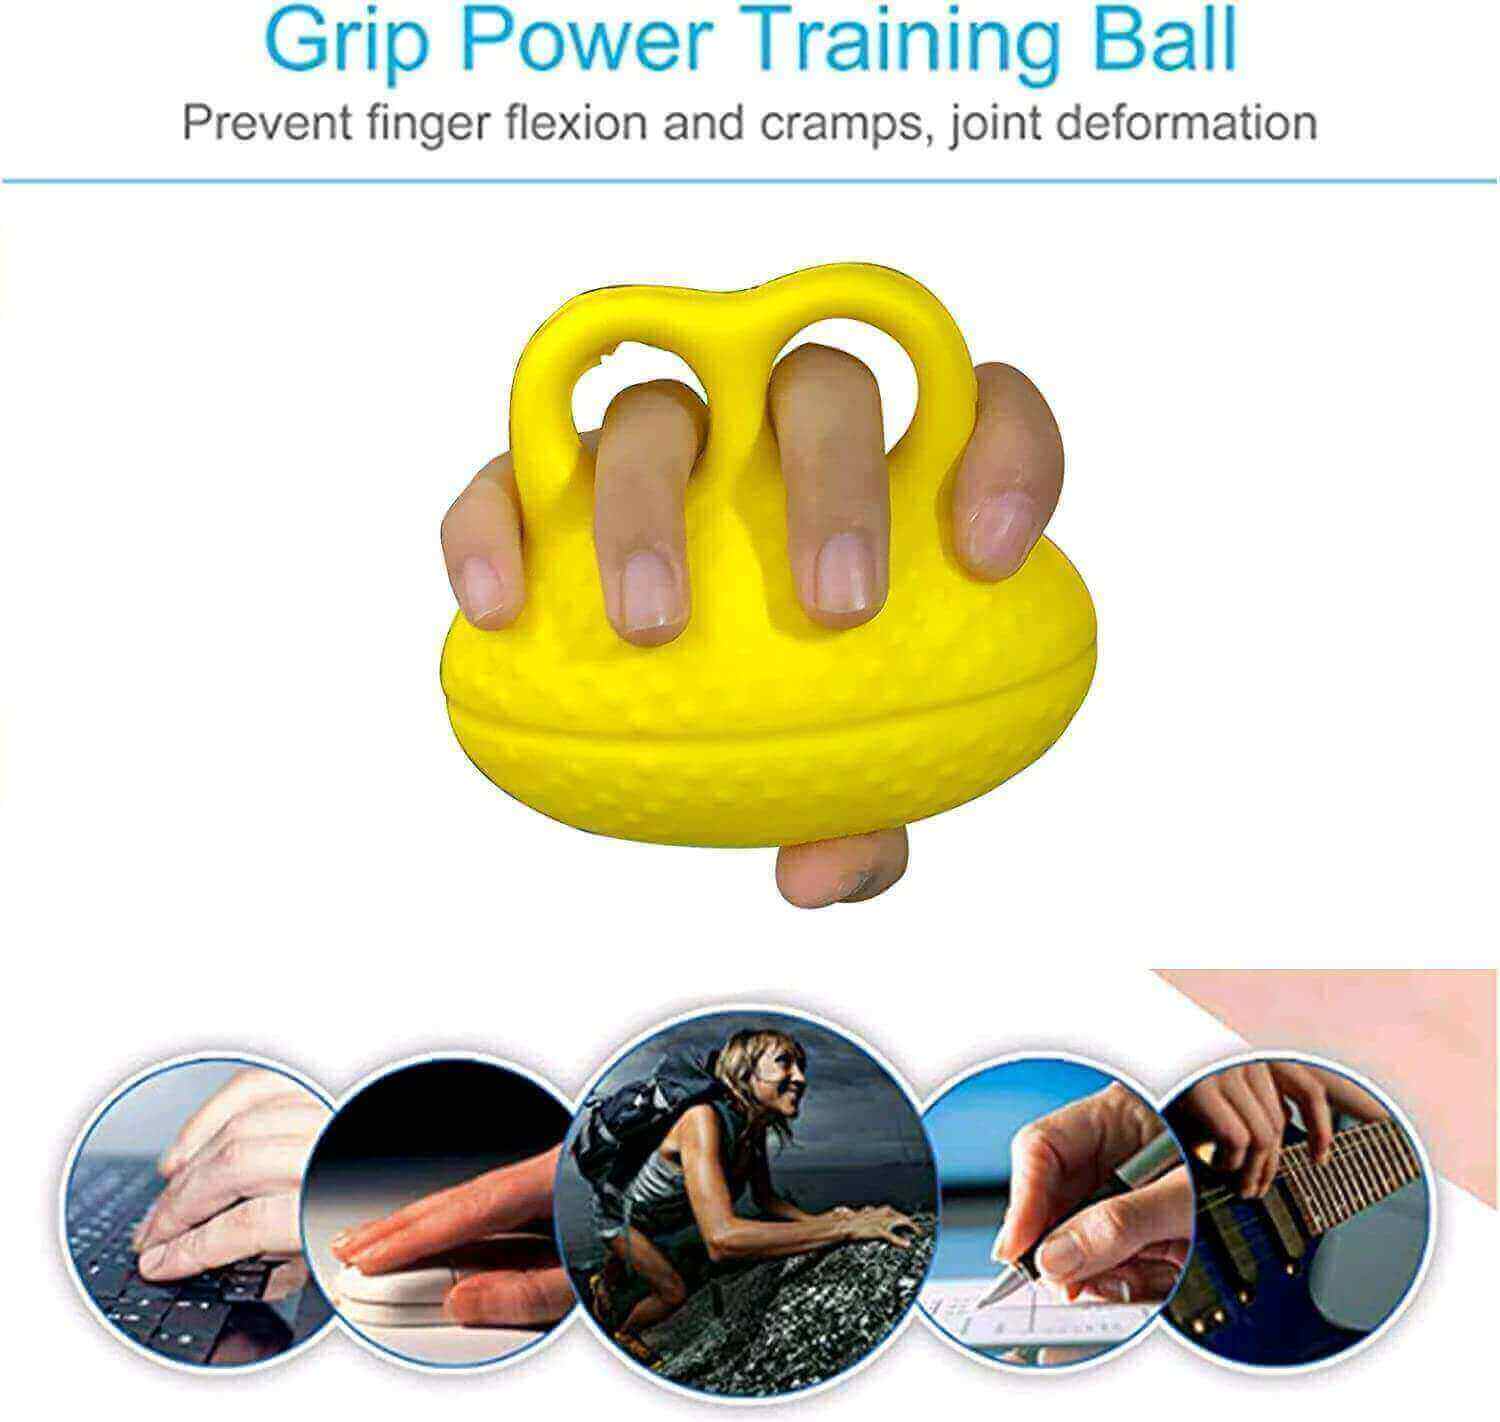 Finger exercise ball and finger resistance band set, various users